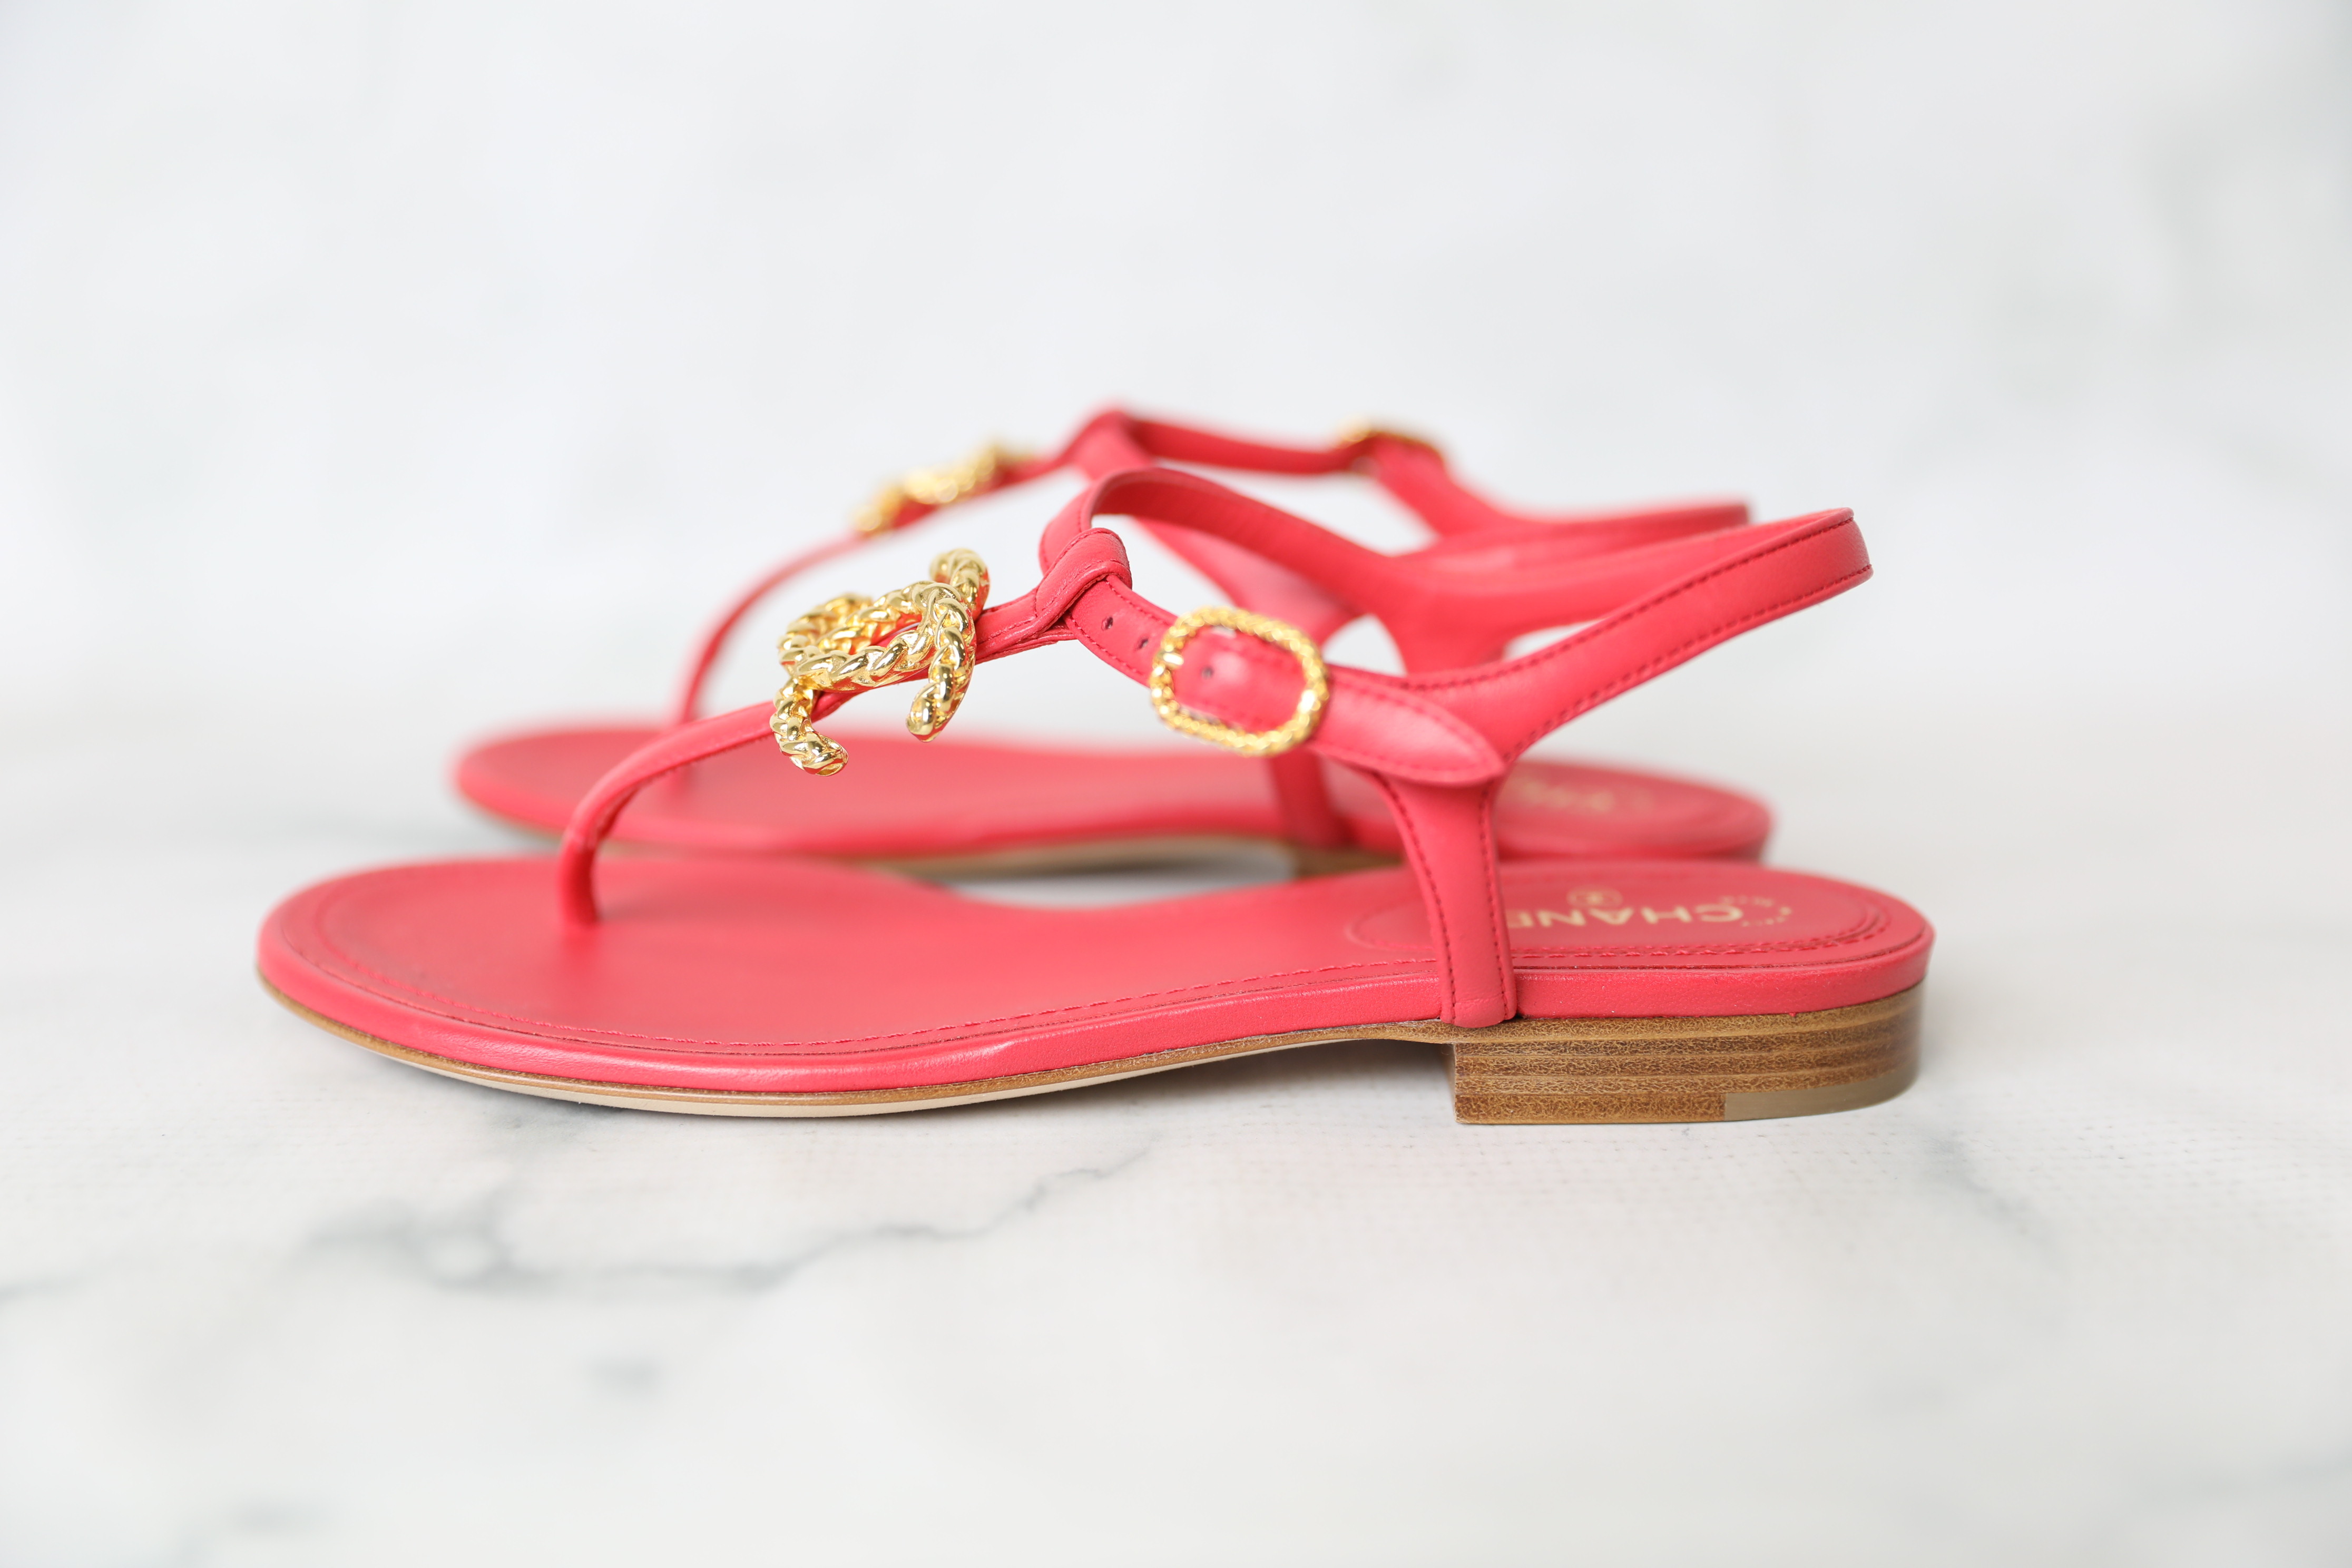 Chanel Shoes Thong Sandals, Pink, Size 36, New in Box WA001